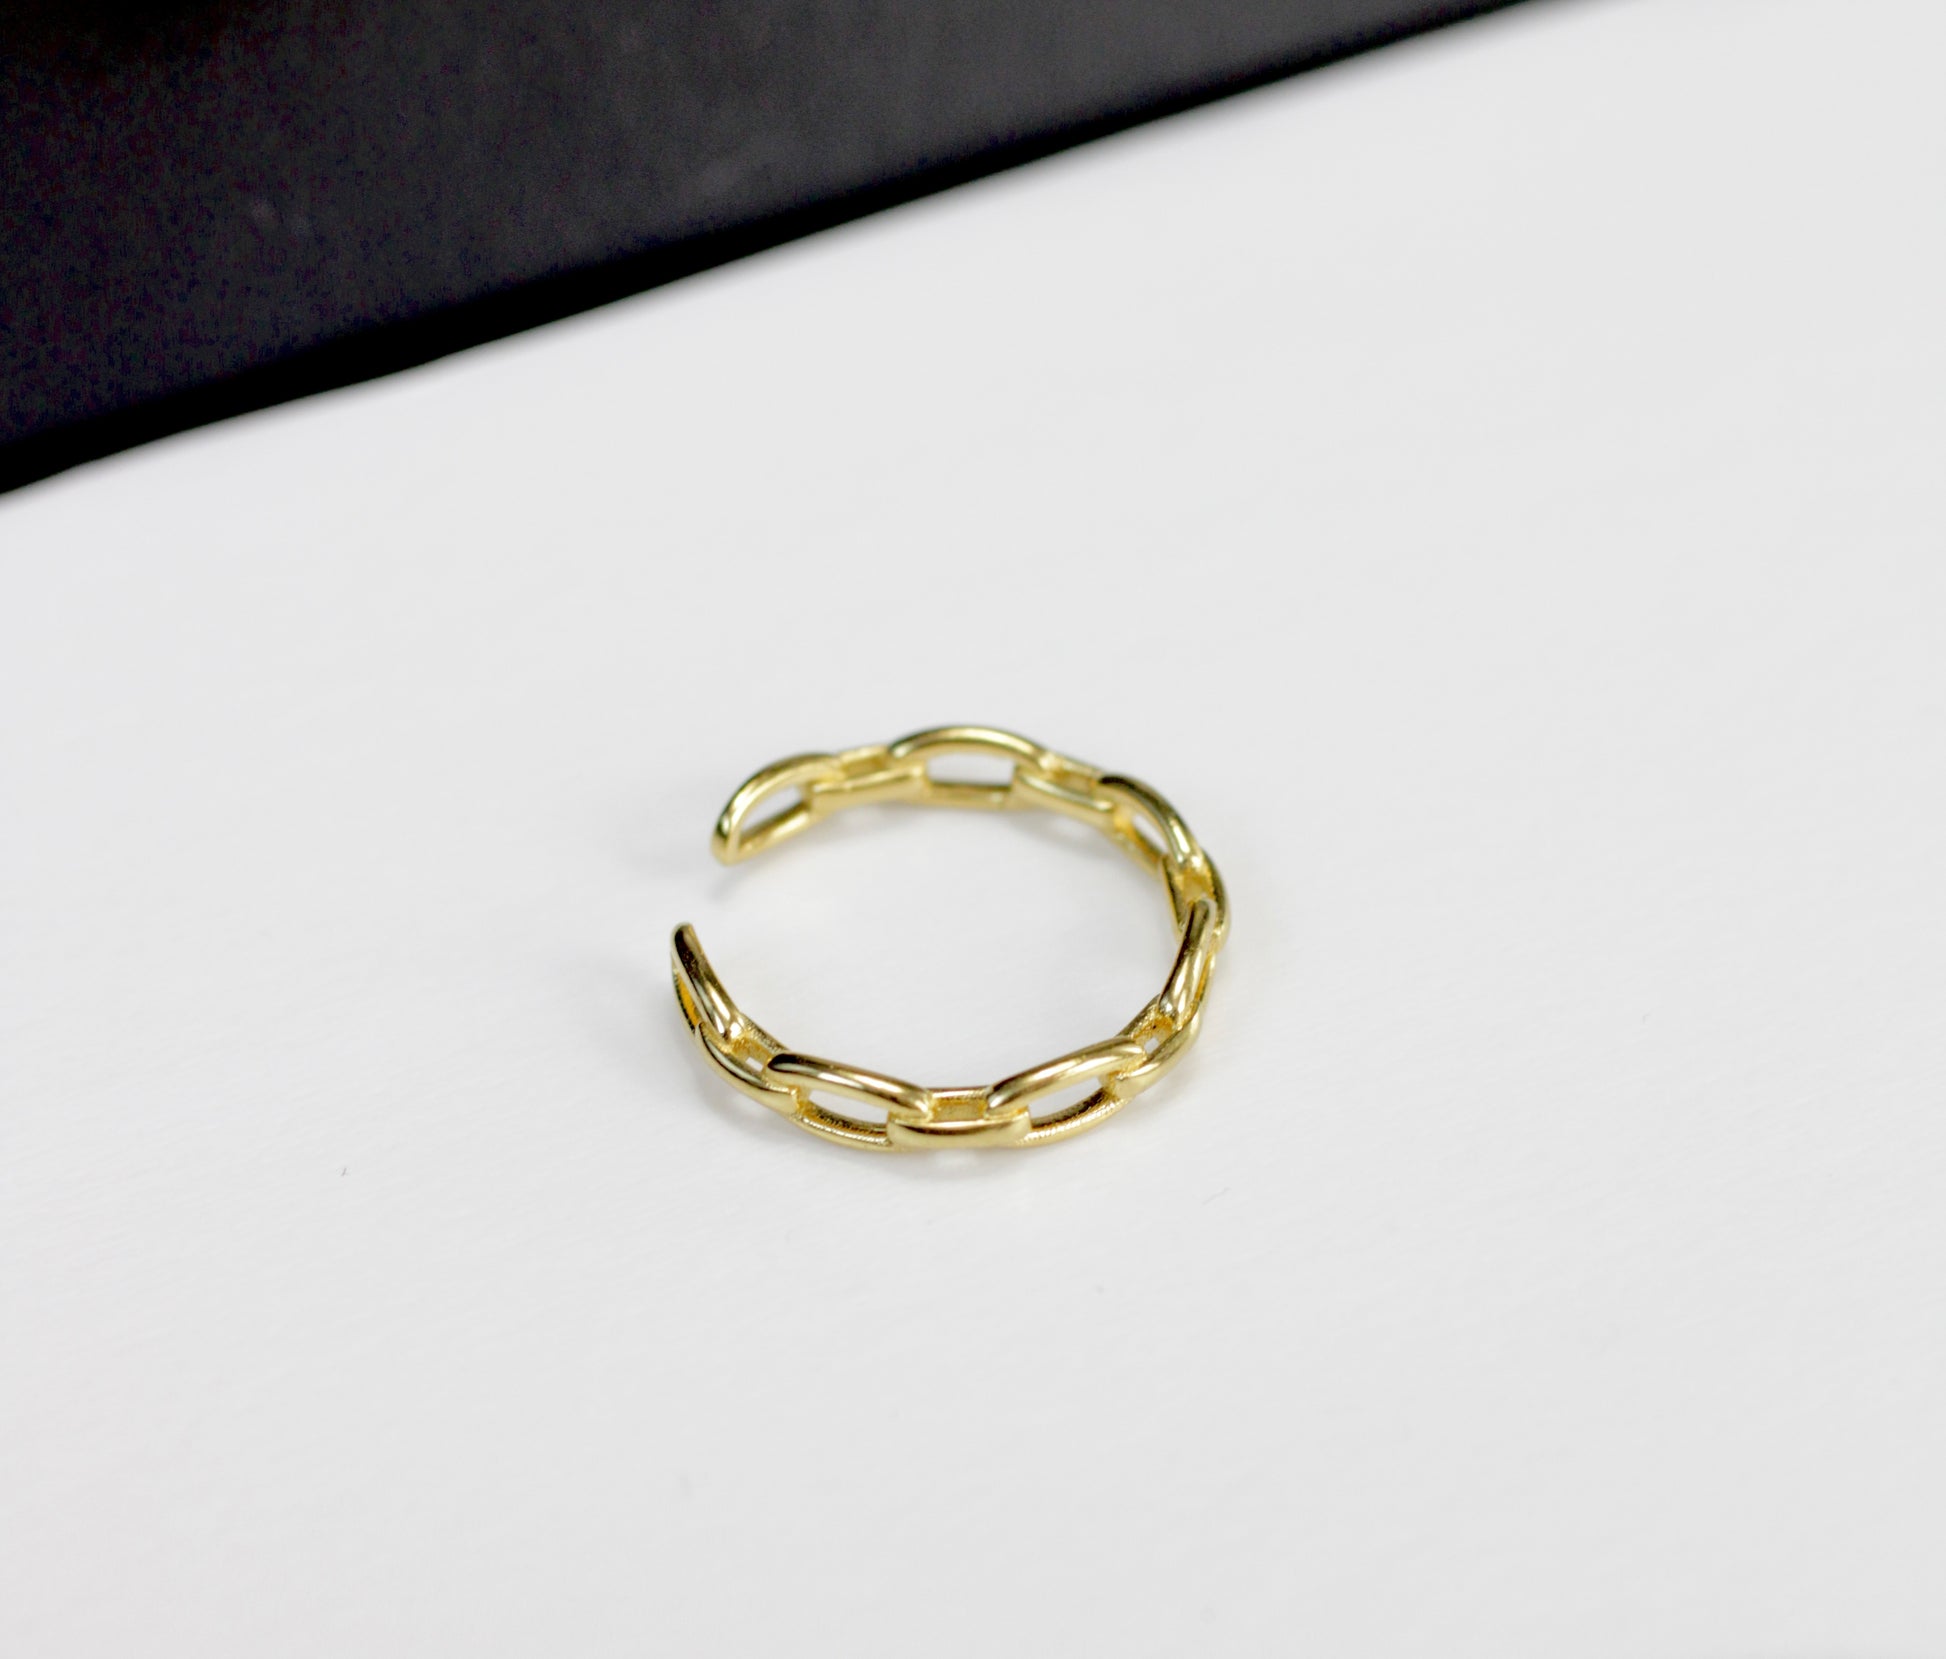 Gold plated with hoop earrings